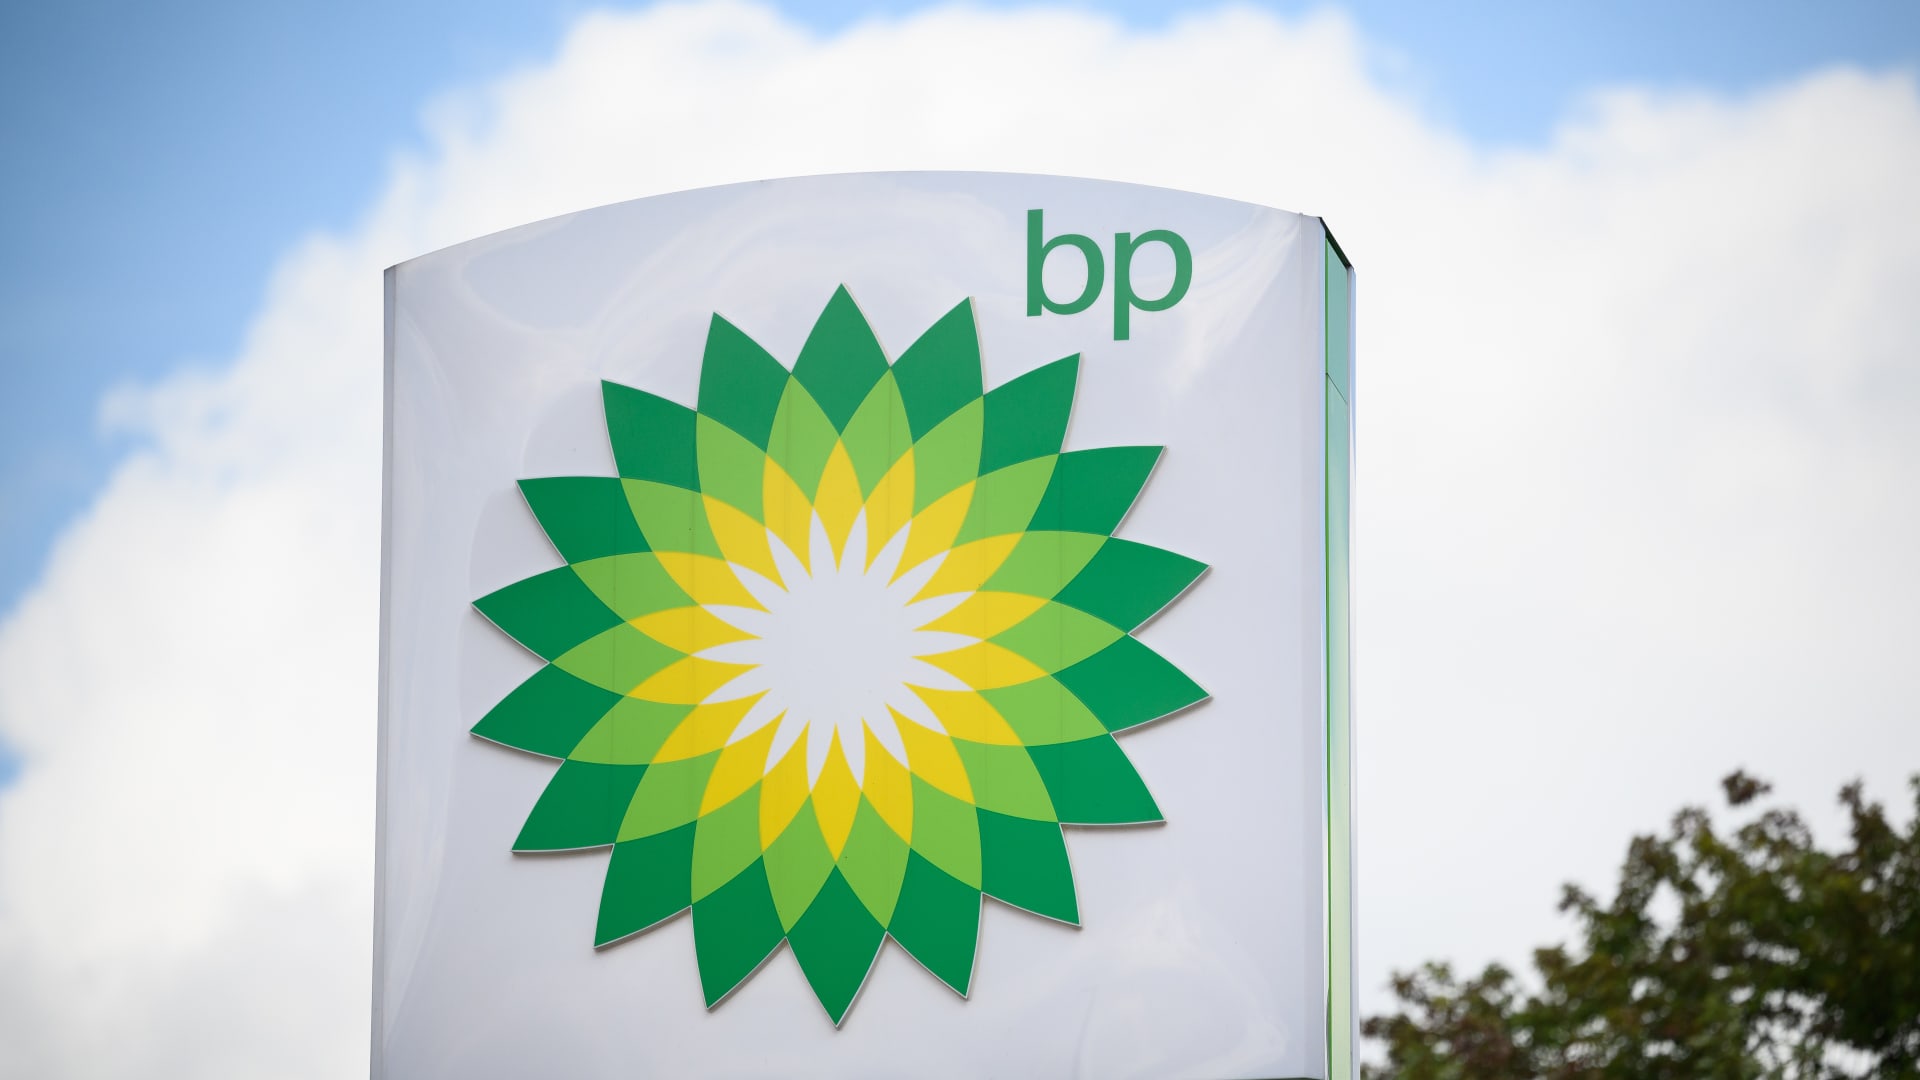 BP records highest profit in decade as cost of living surges